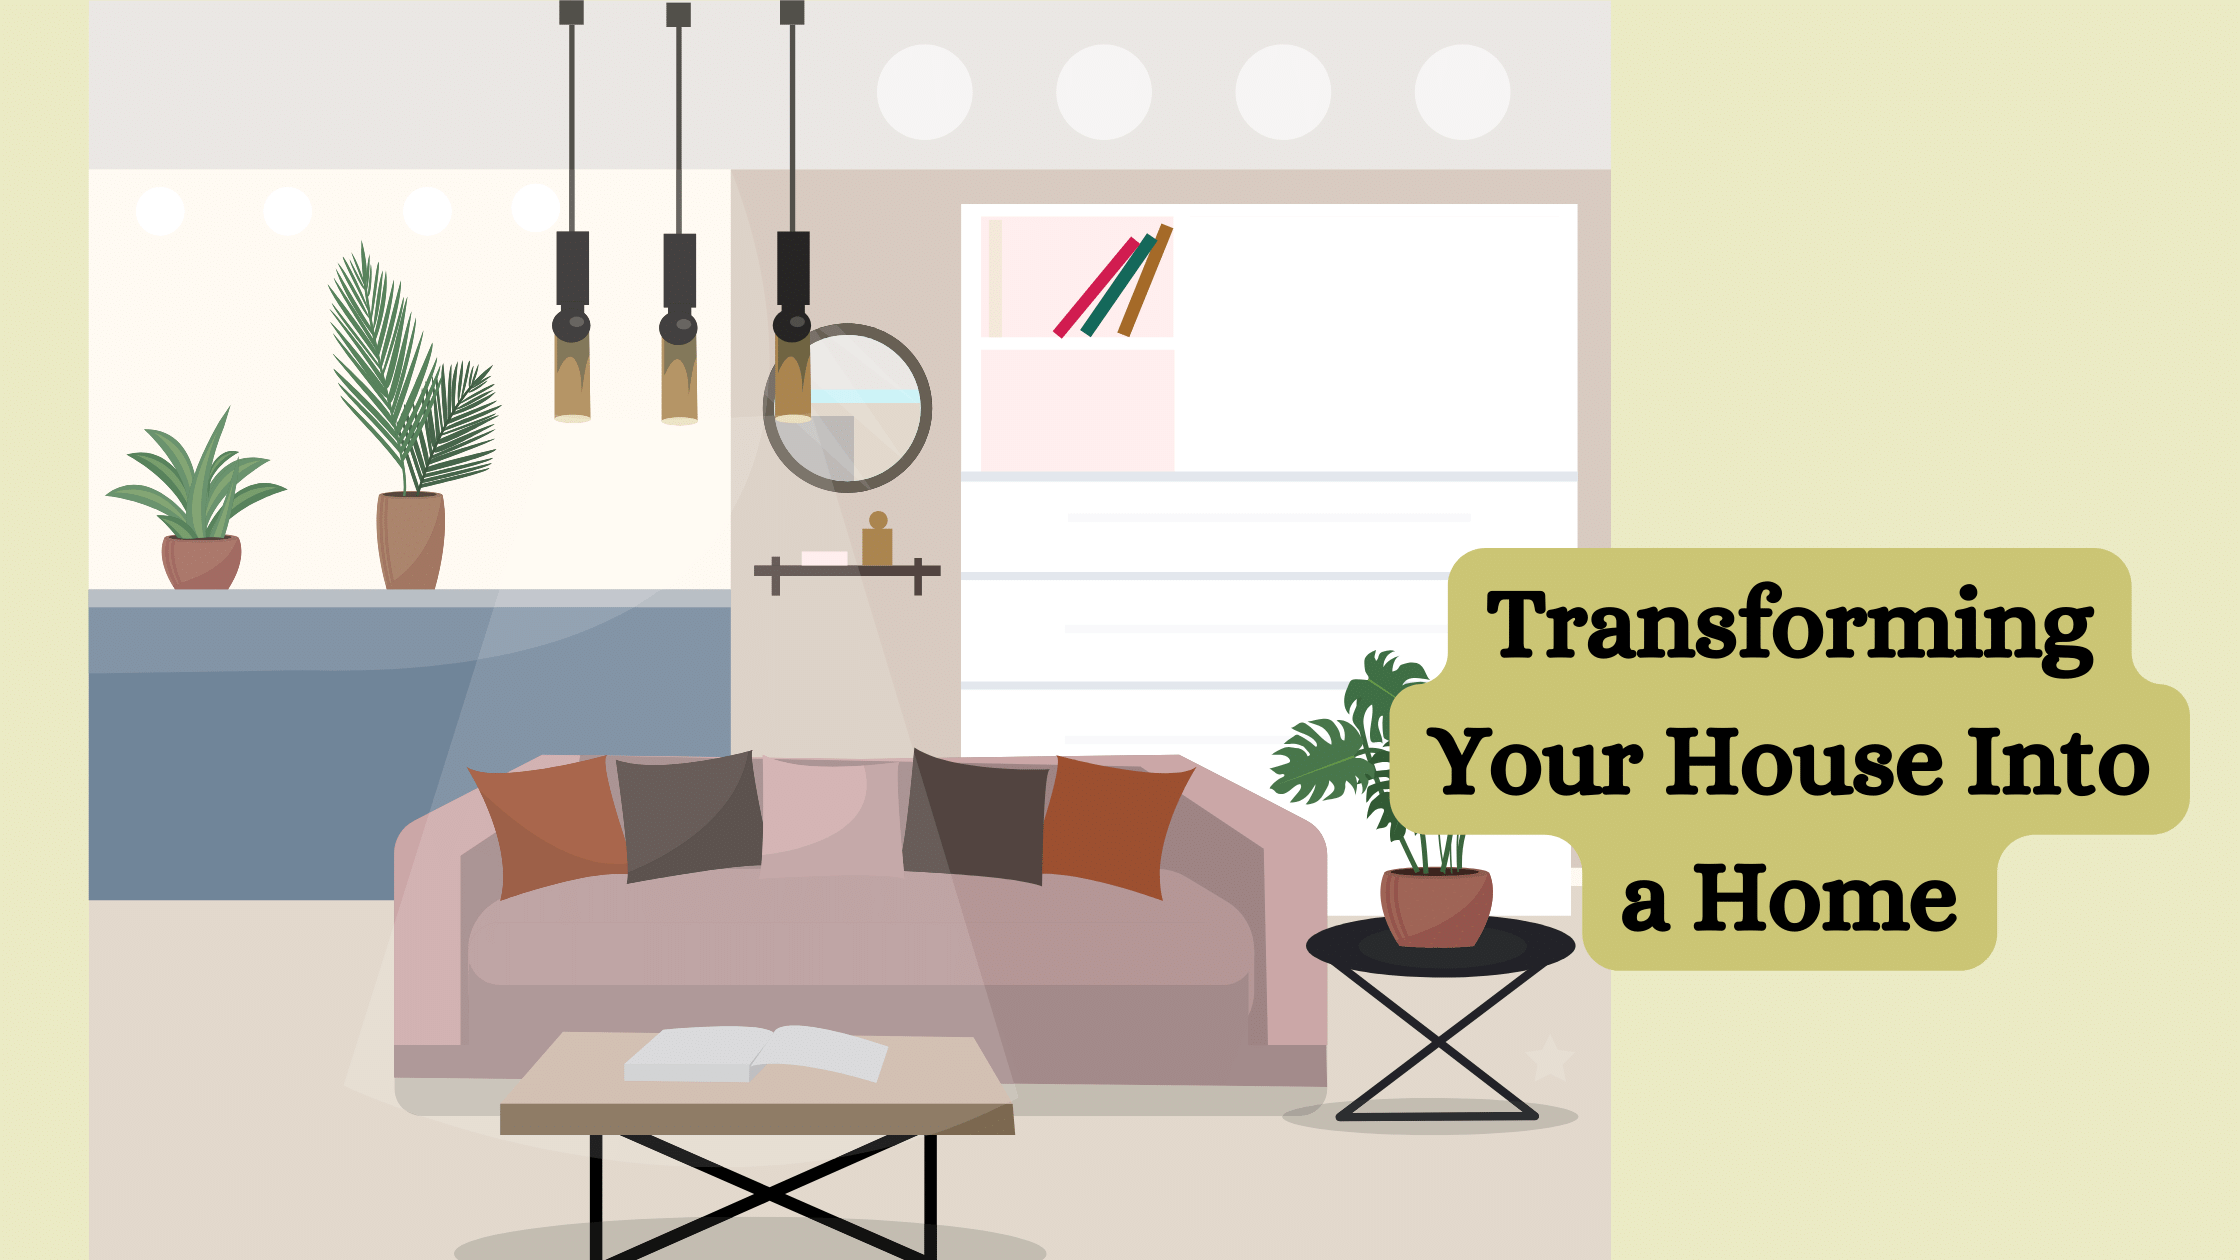 Transforming Your House Into a Home